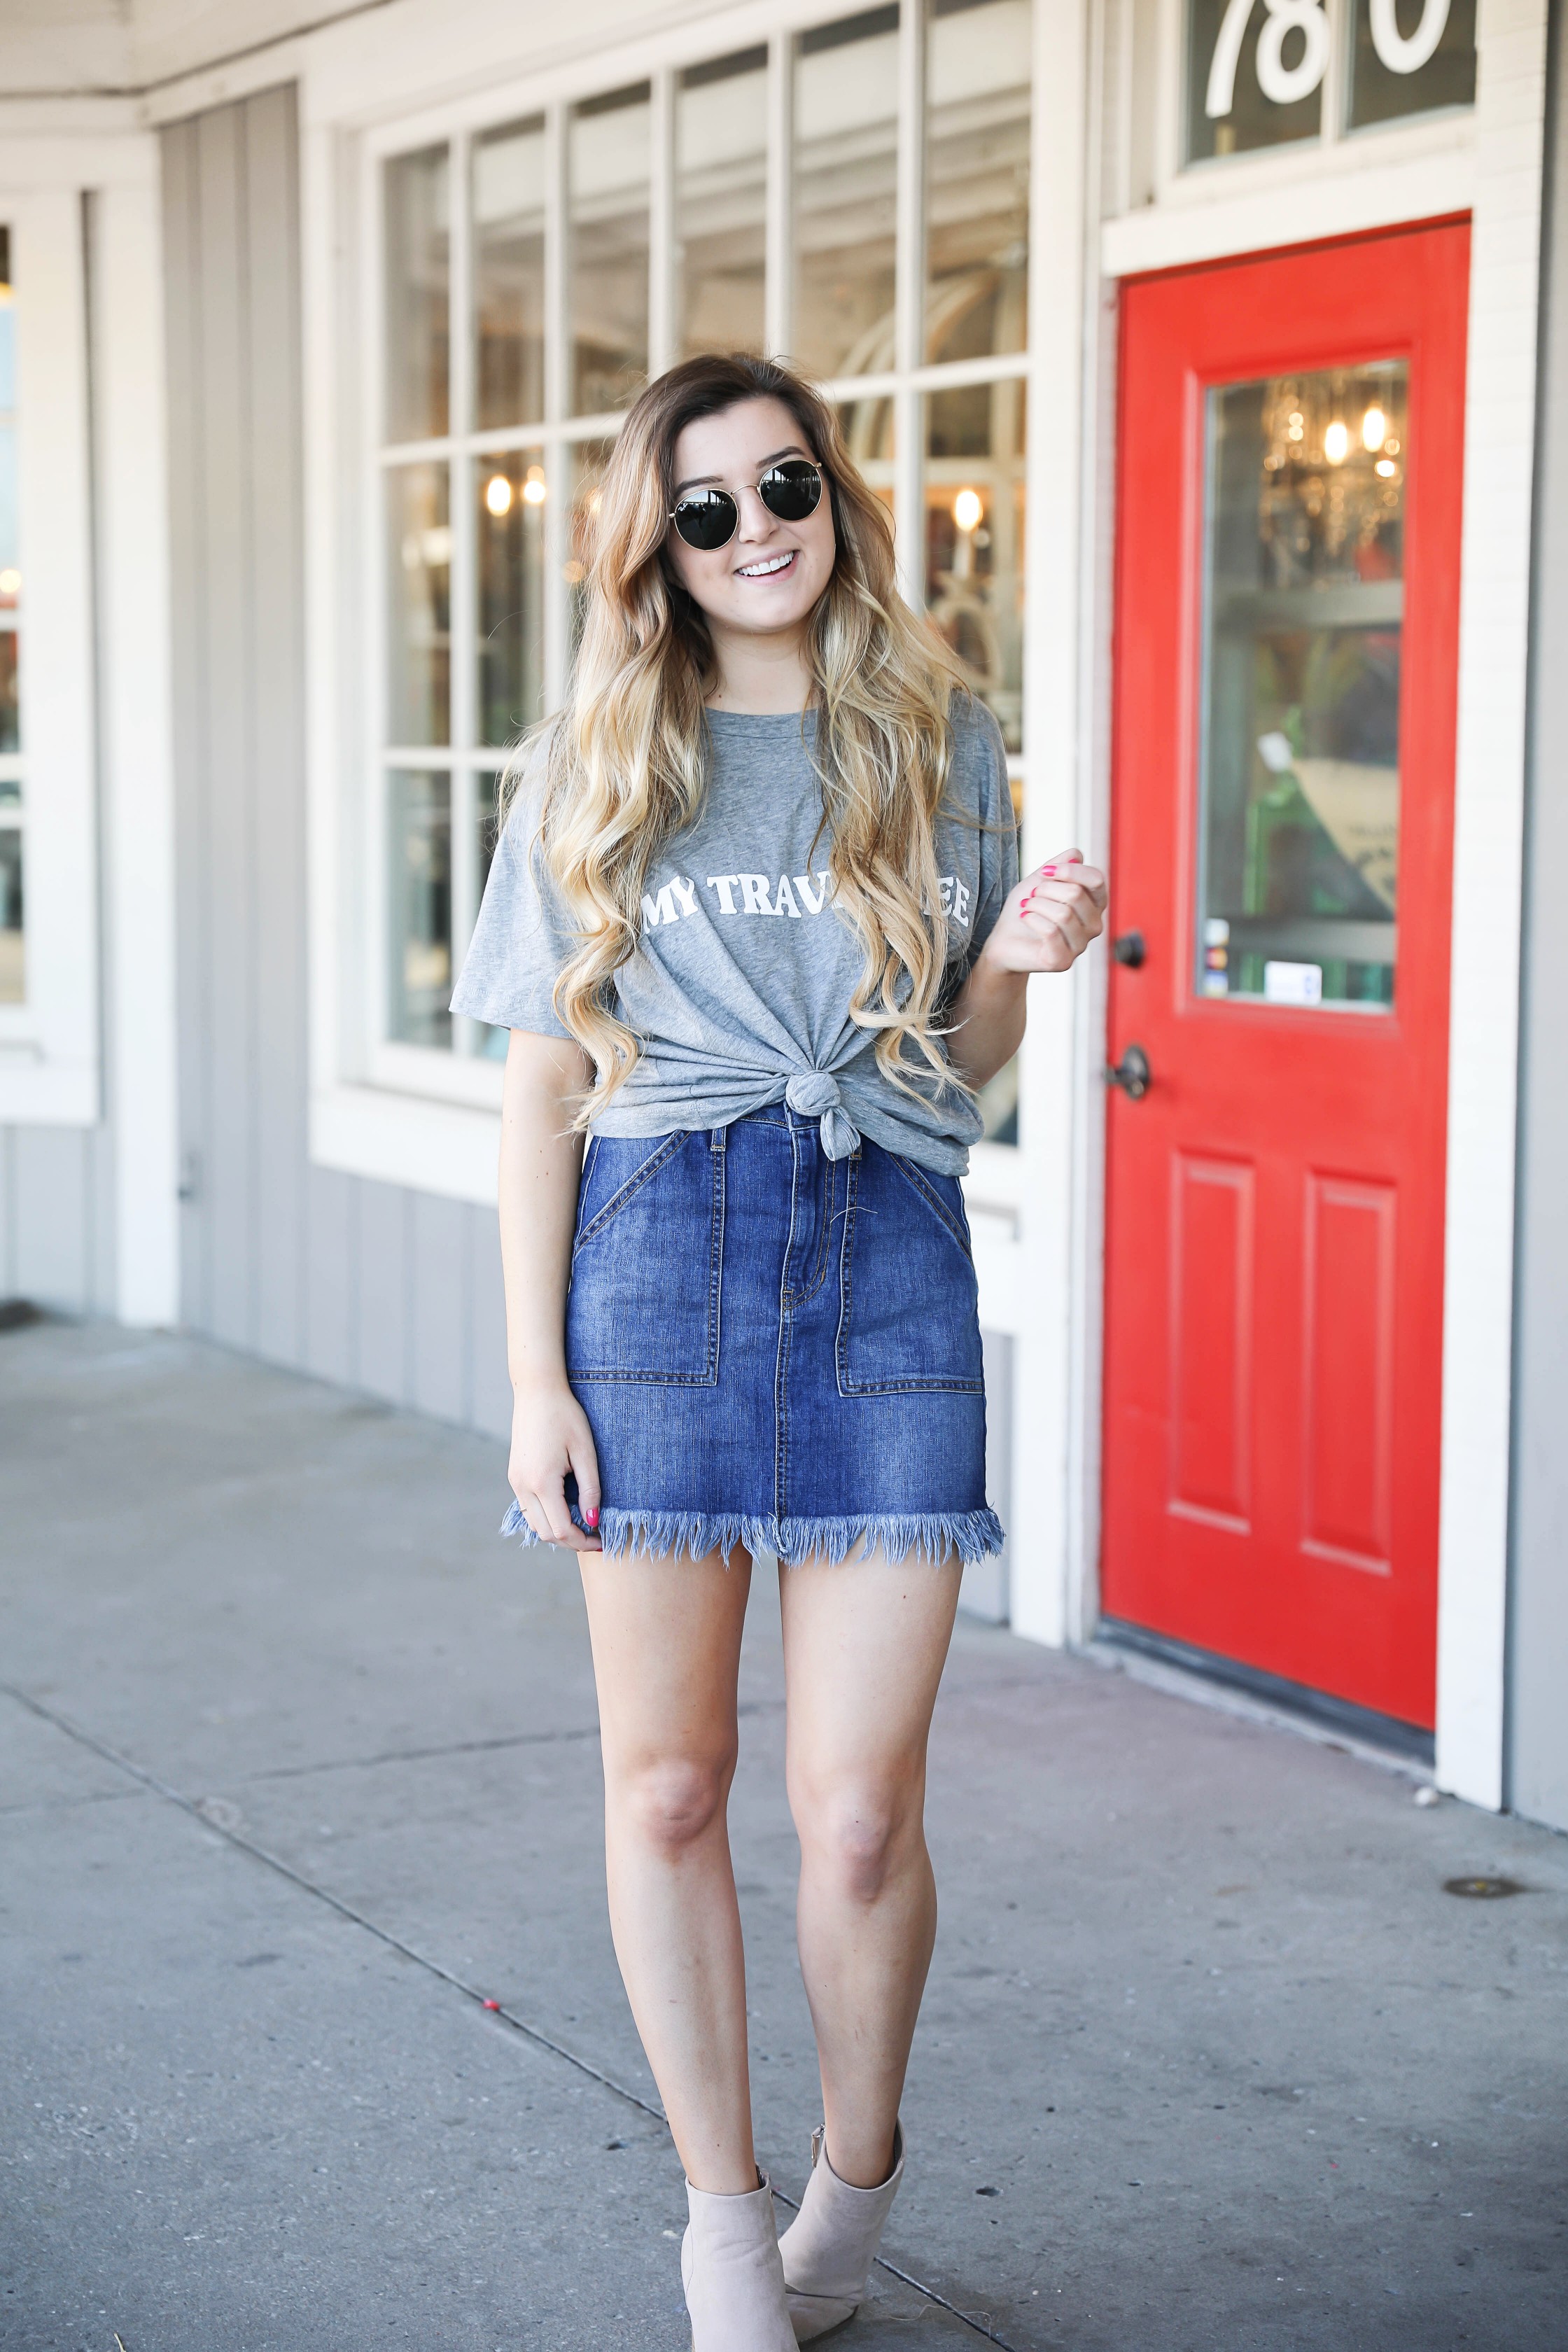 Show Me your mumu grey travel tee! This is such a cute travel tshirt! Not to mention, this jean skirt is adorable! I love how the jean skirt is frayed! Details on fashion blog daily dose of charm by lauren lindmark